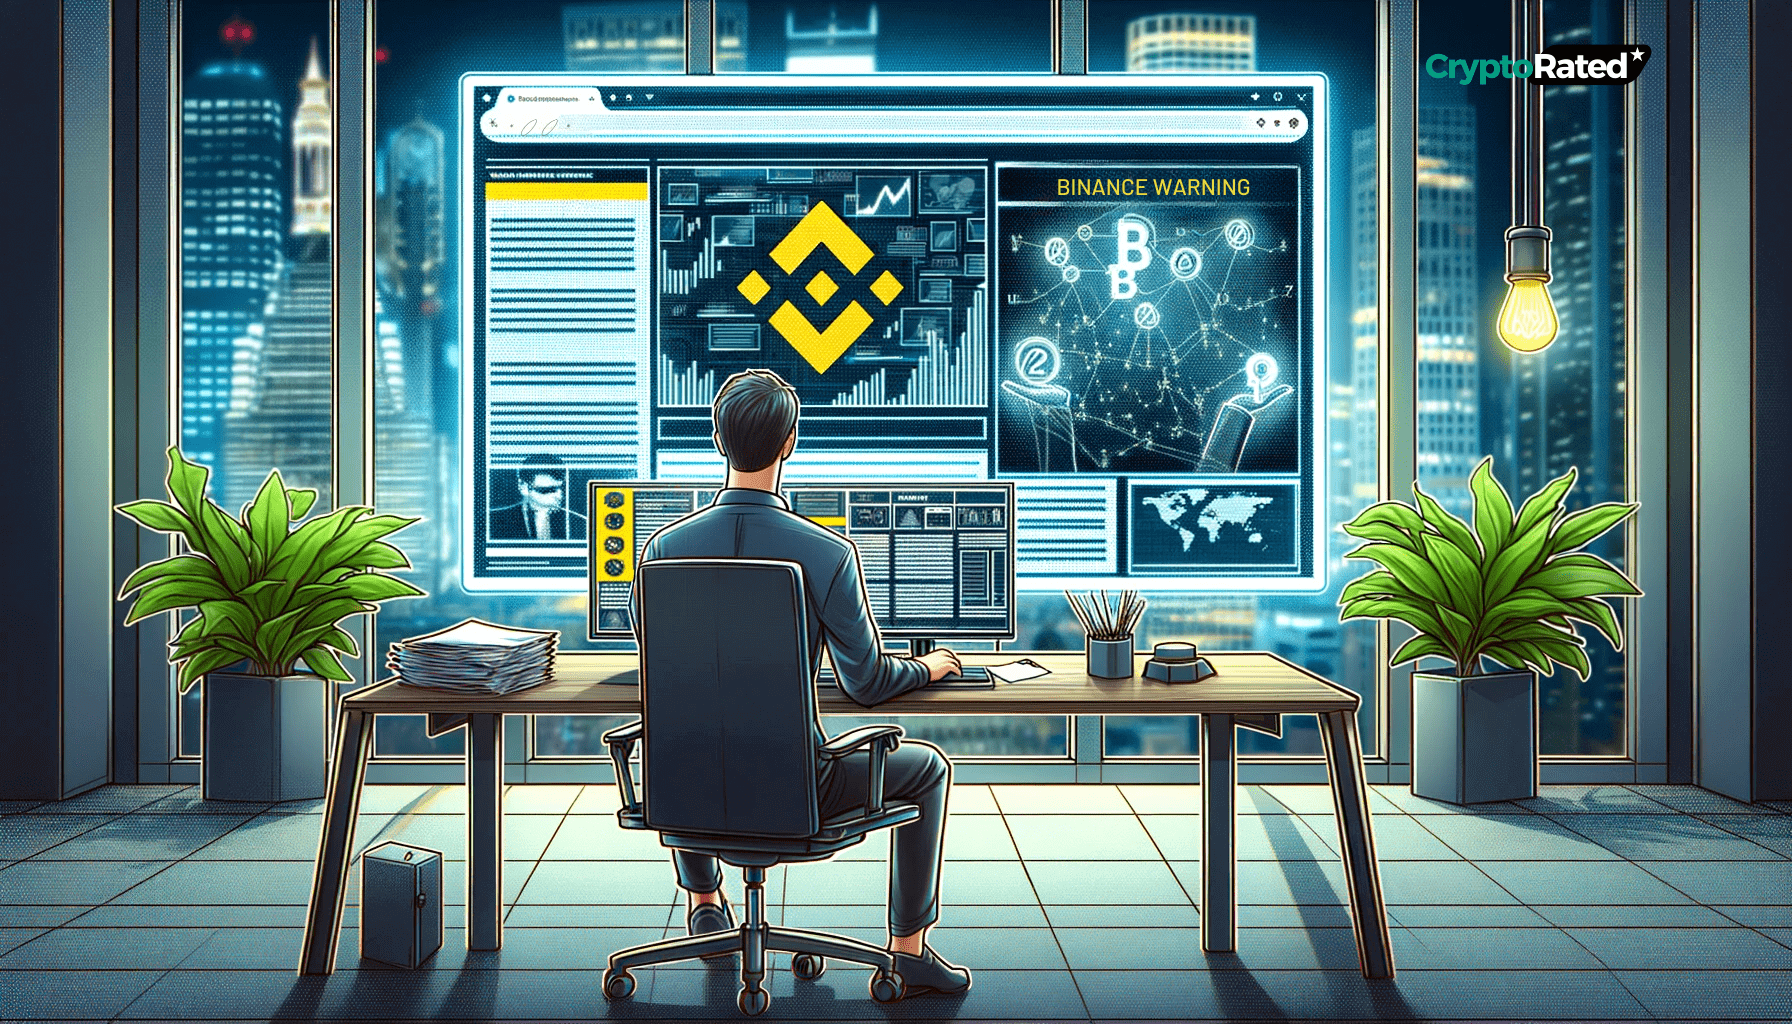 Binance is Operating Without a License Warns Philippines Security Regulator